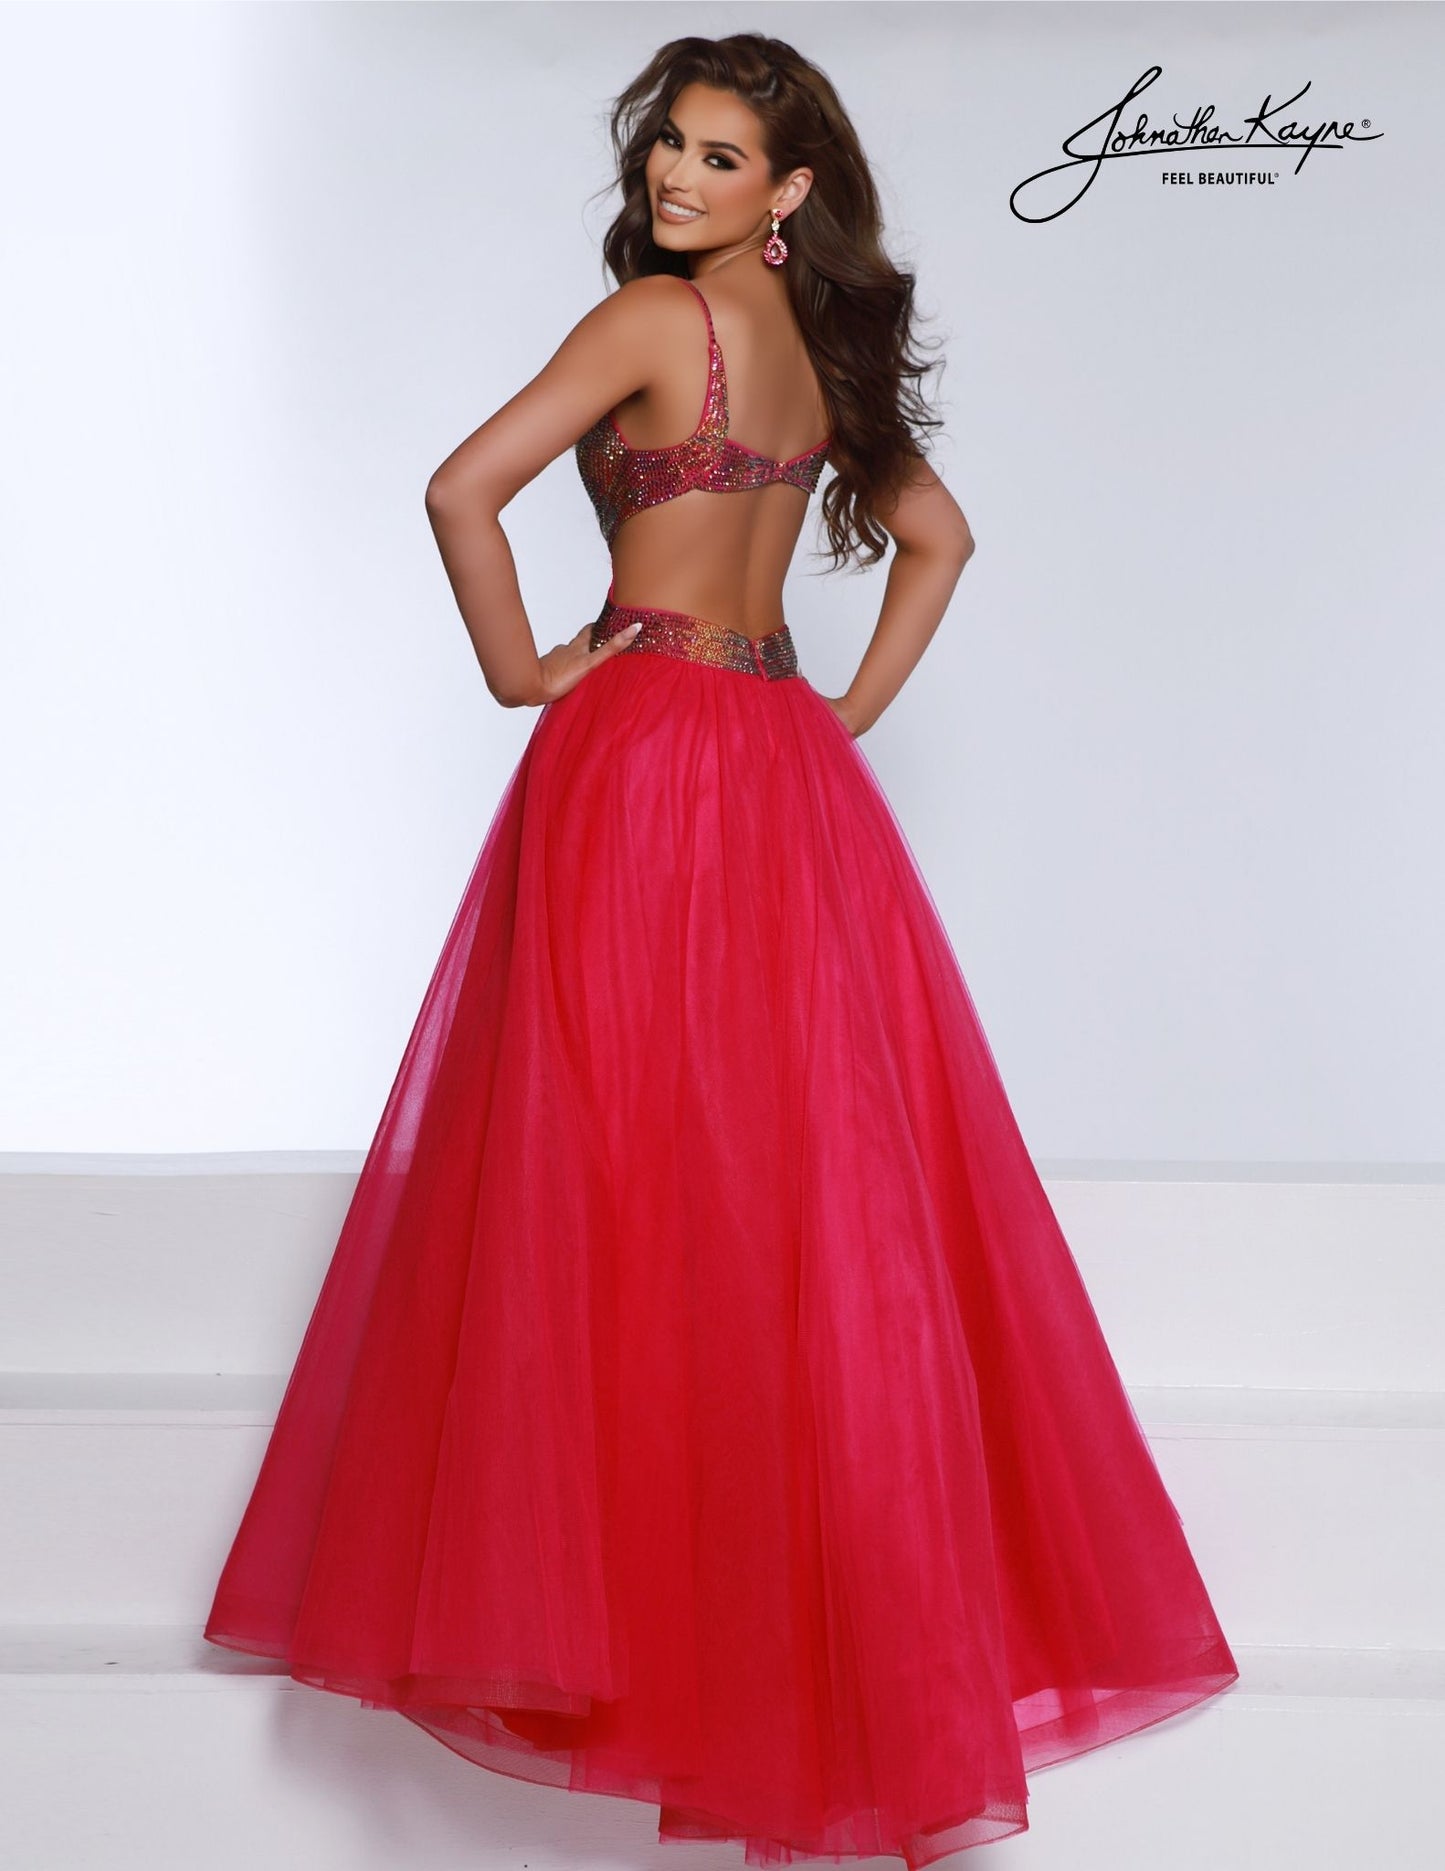 Make an unforgettable entrance with the Johnathan Kayne 2870 prom dress. A-Line tulle design features ombre stones, a plunging neckline, and elegant long cut. Make sure all eyes are on you at your formal event. A new take on classic ballgowns, the tulle gown features side cut outs and a daring back. Glisten like a star with the ombre stoning embellishments on the bodice that ensure you shine from every angle.